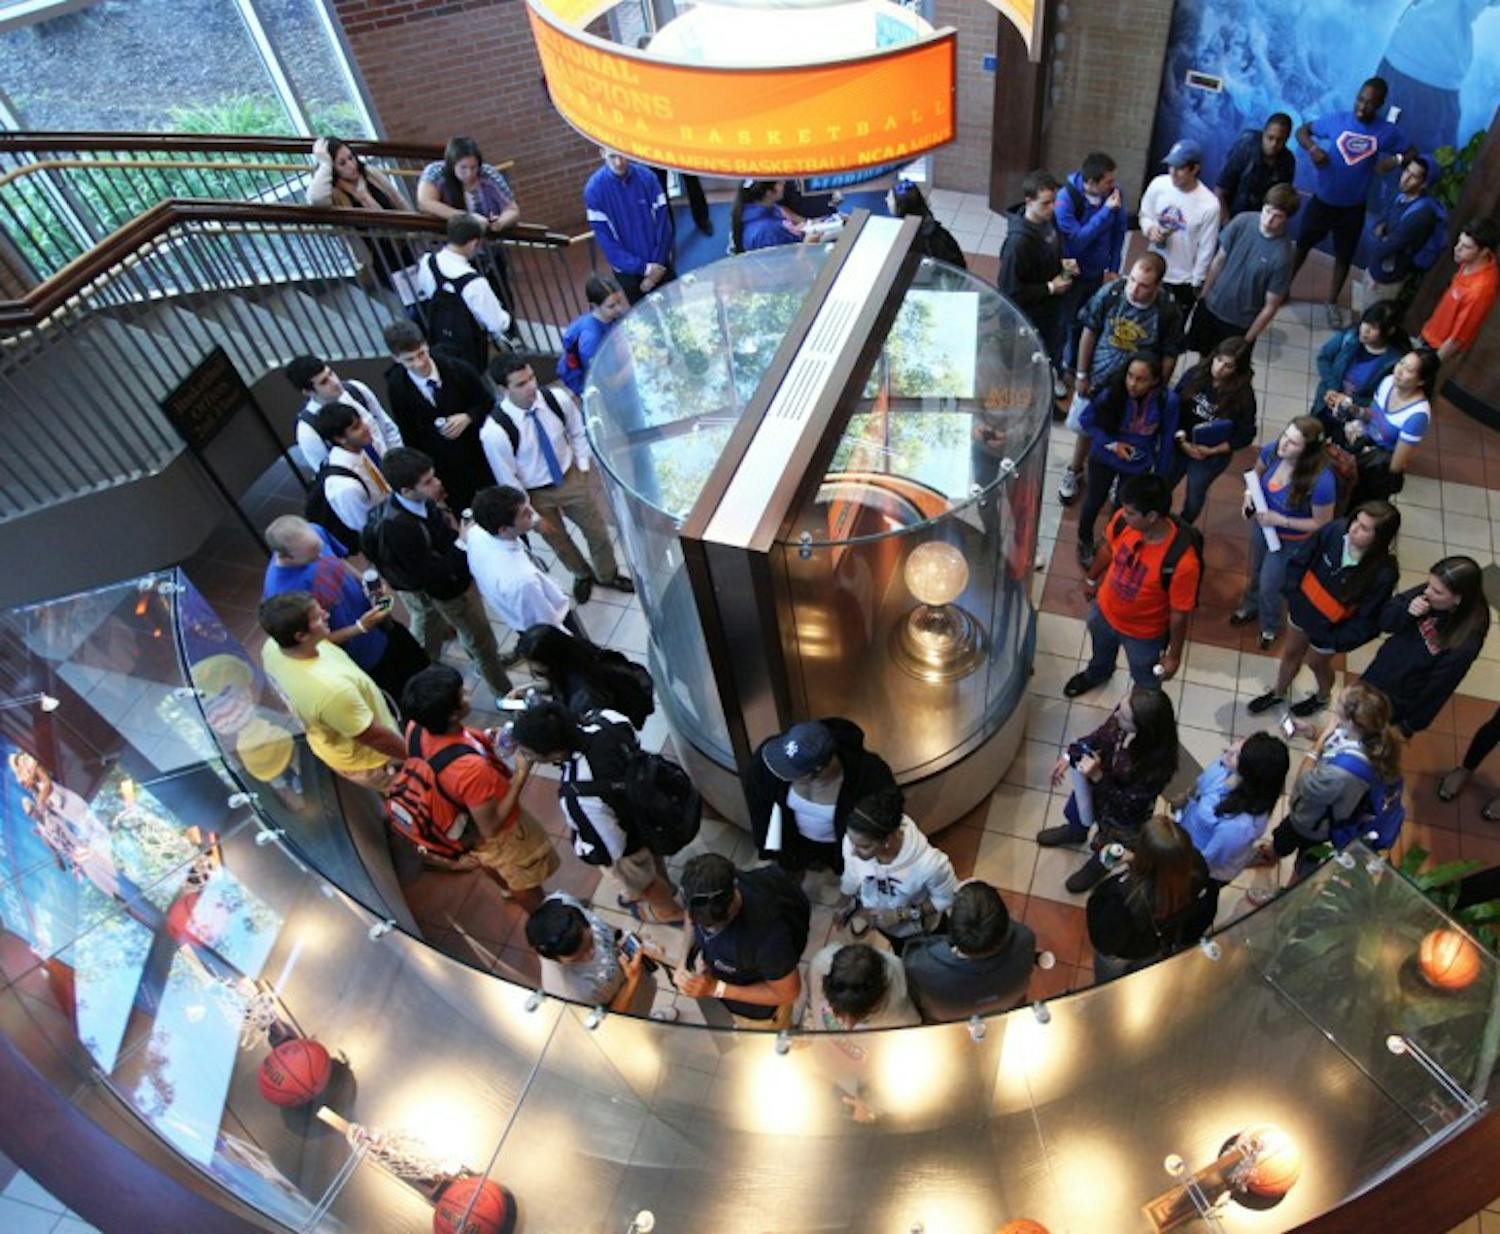 &nbsp;
Students gather in the lobby of the basketball complex during a tour of the practice facility at Rowdy Fest Monday night. Following the tour, students ate pizza and had a meet and greet with the men’s basketball players and coaches.